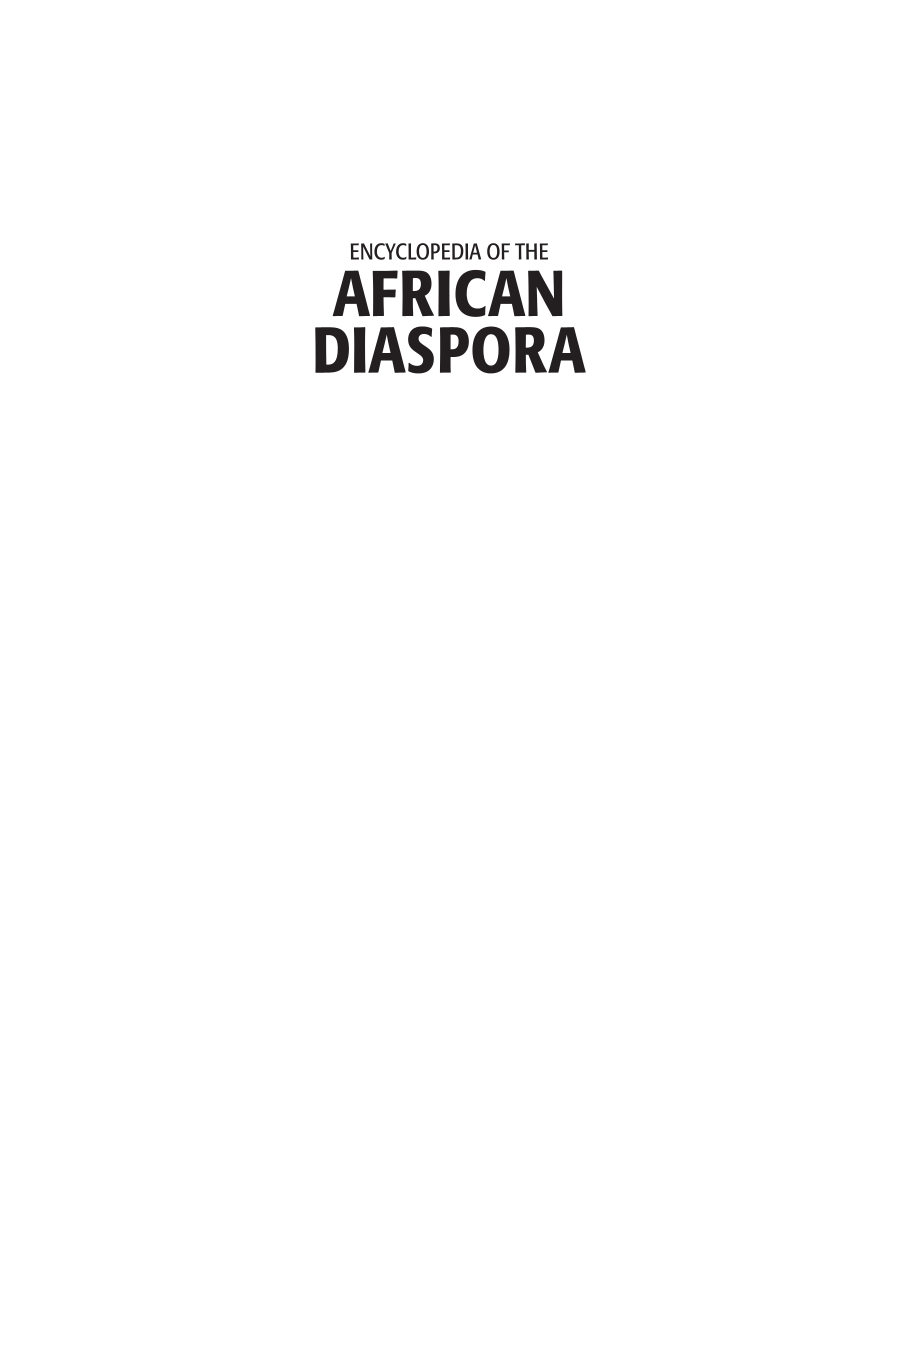 Encyclopedia of the African Diaspora: Origins, Experiences, and Culture [3 volumes] page Vol1:i1